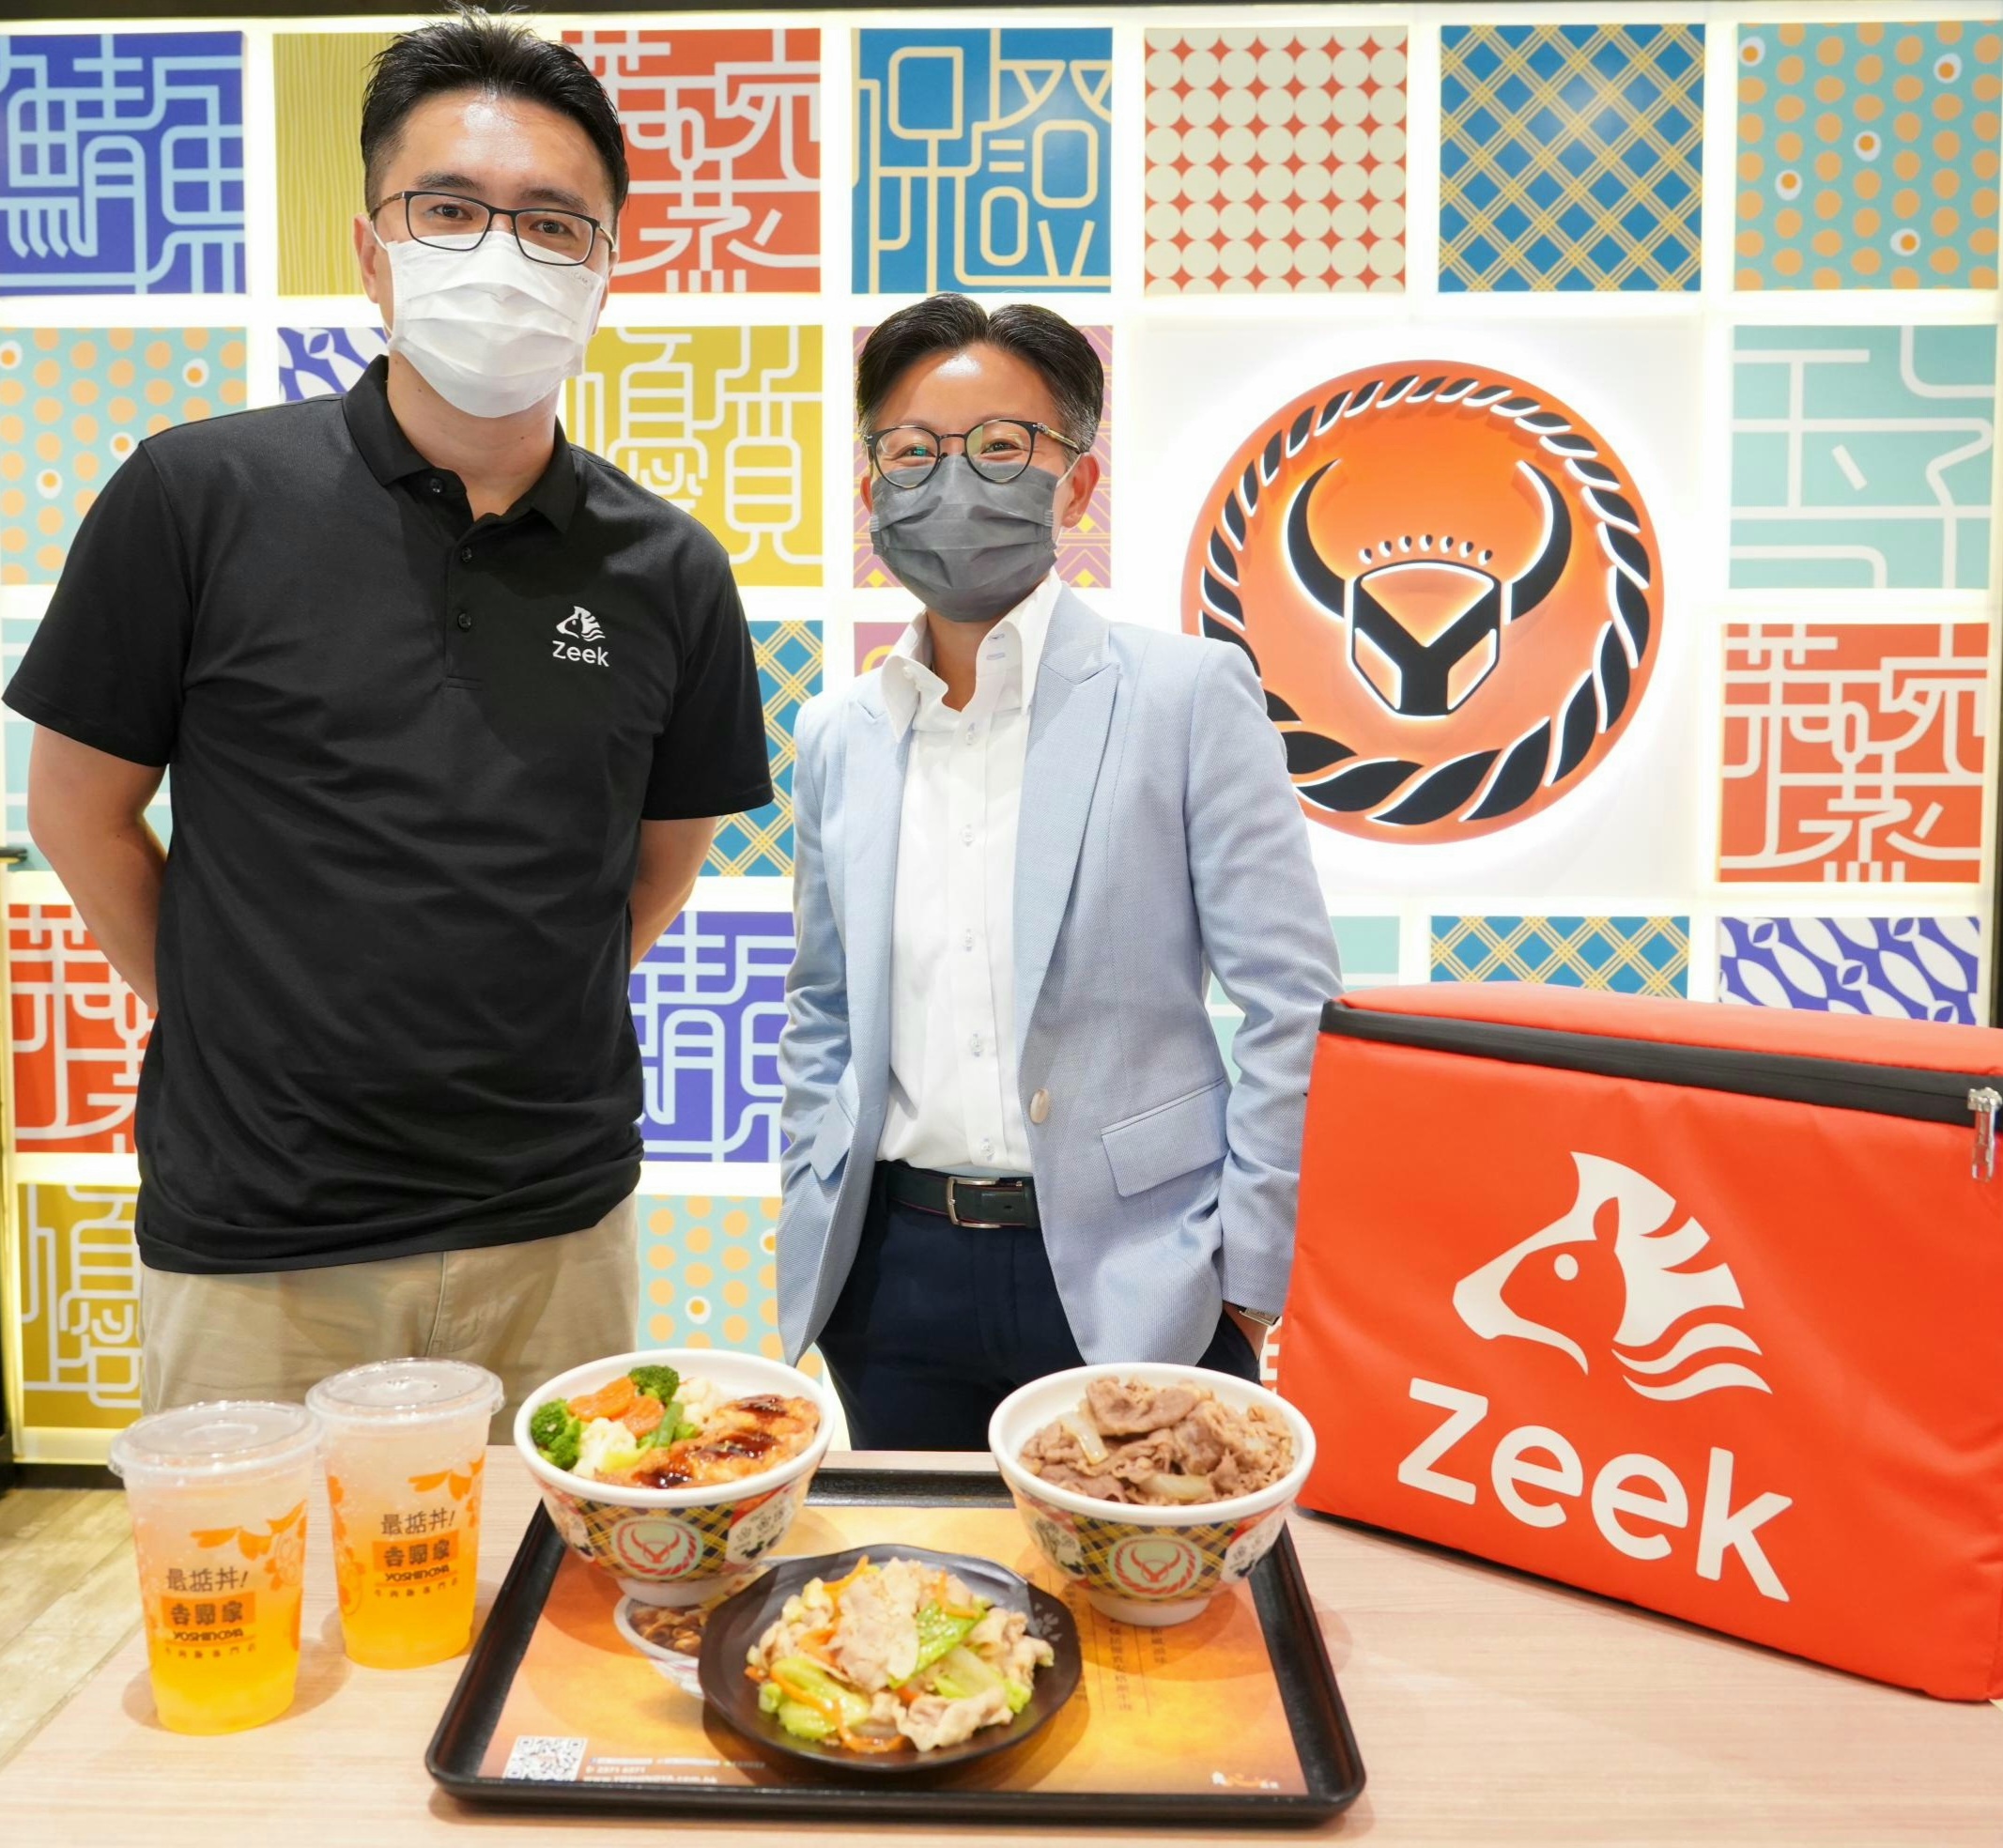 Leading Smart Logistics Firm Zeek Set To Accelerate Business Growth of Japanese Multinational Fast Food Chain Yoshinoya in Their New Partnership